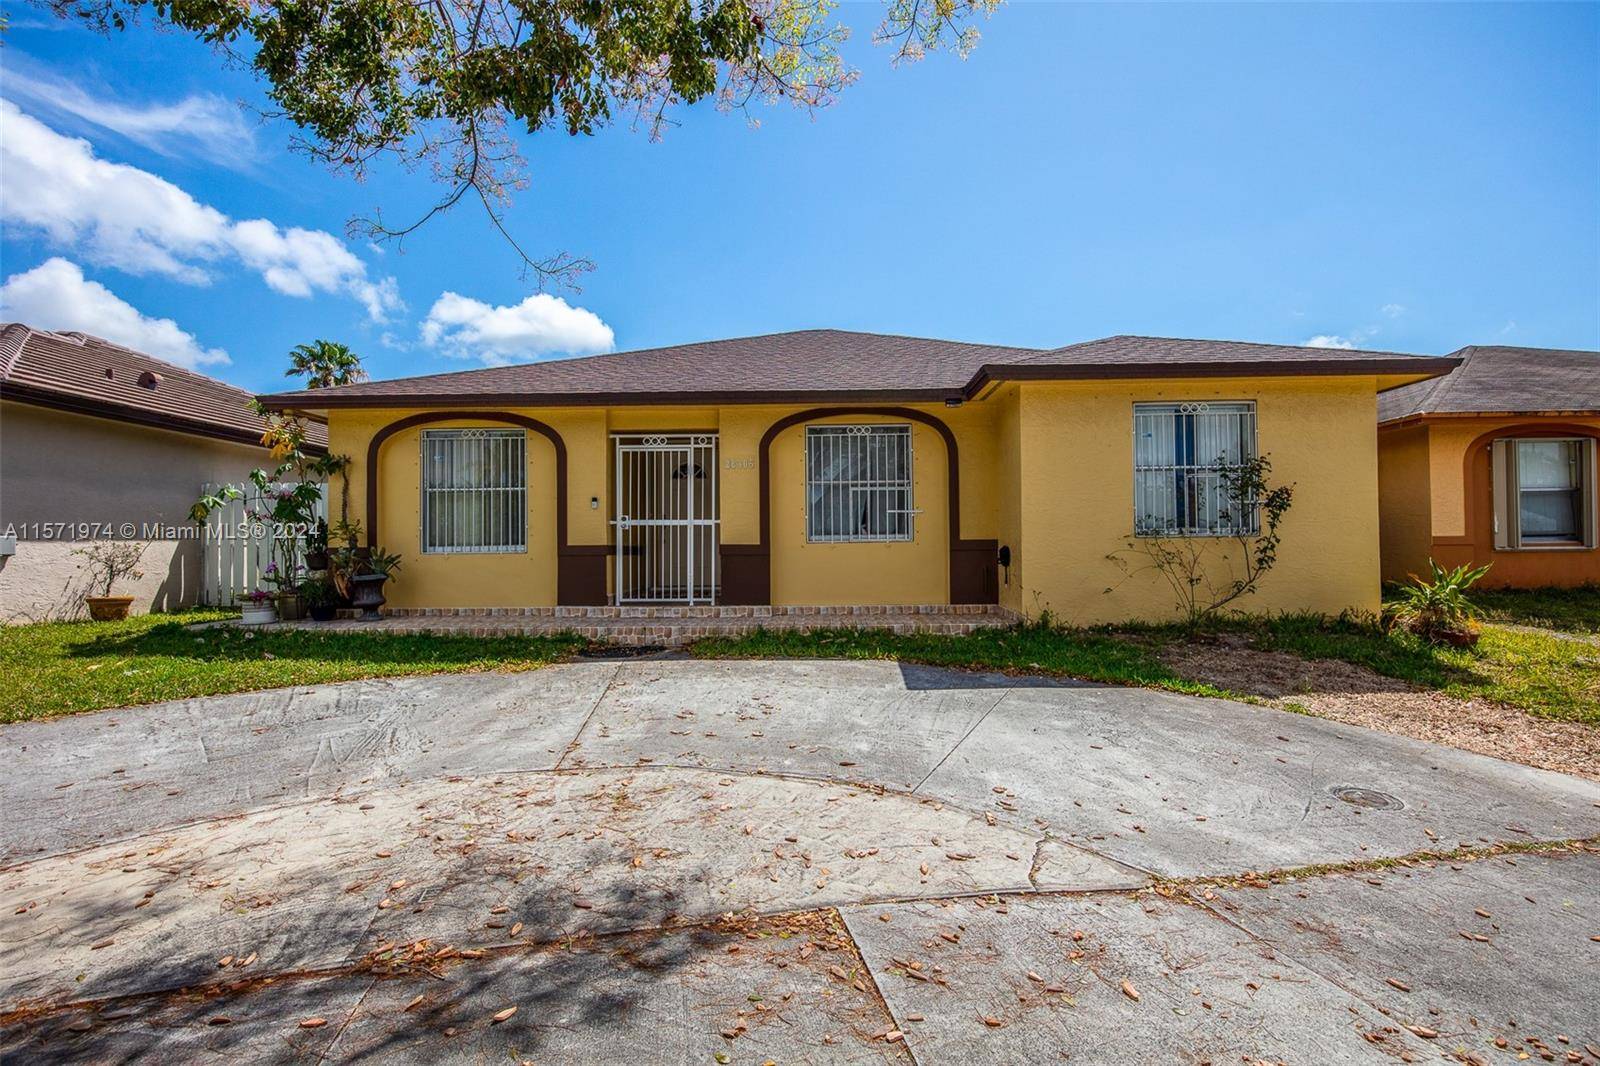 Excellent 3 bedroom 2 bath home with a great screened in patio and large backyard.